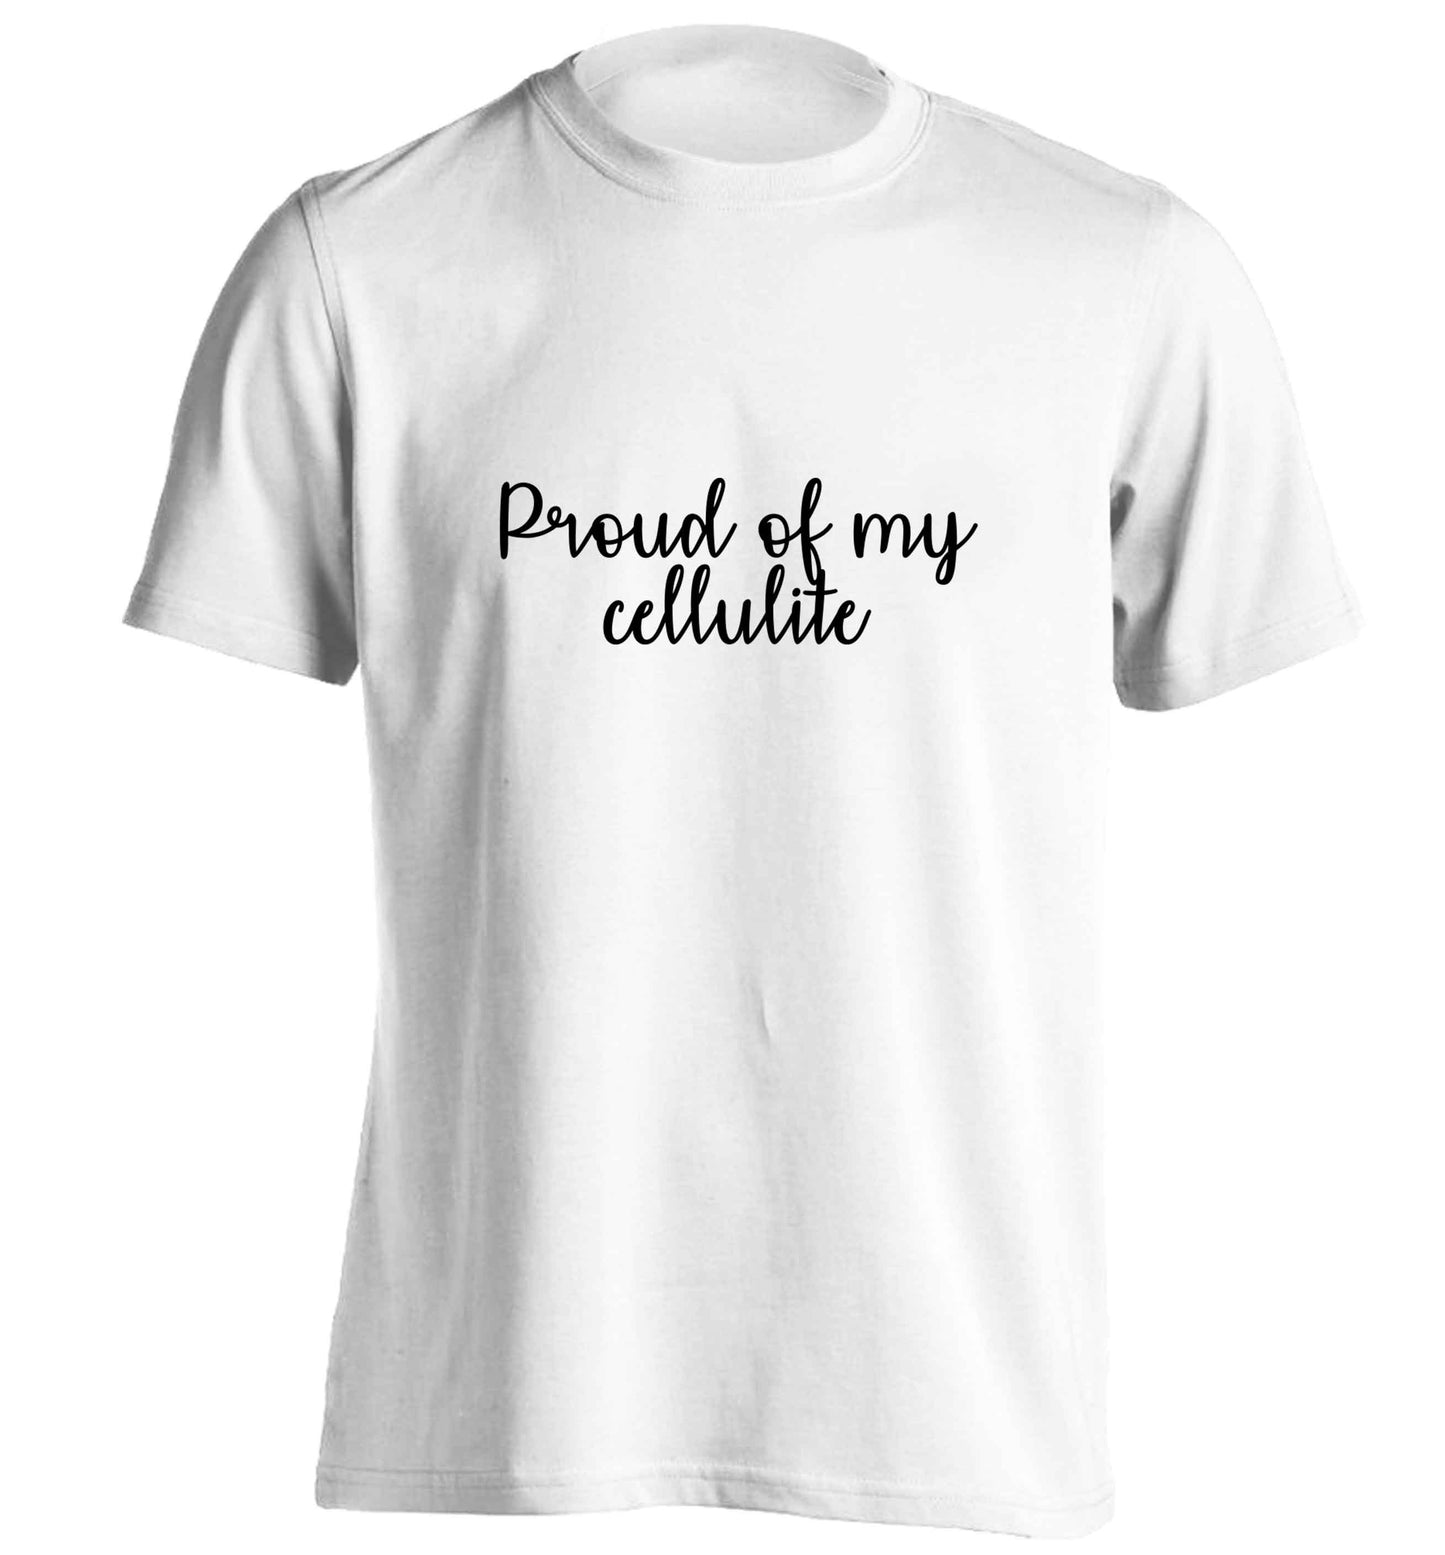 Proud of my cellulite adults unisex white Tshirt 2XL